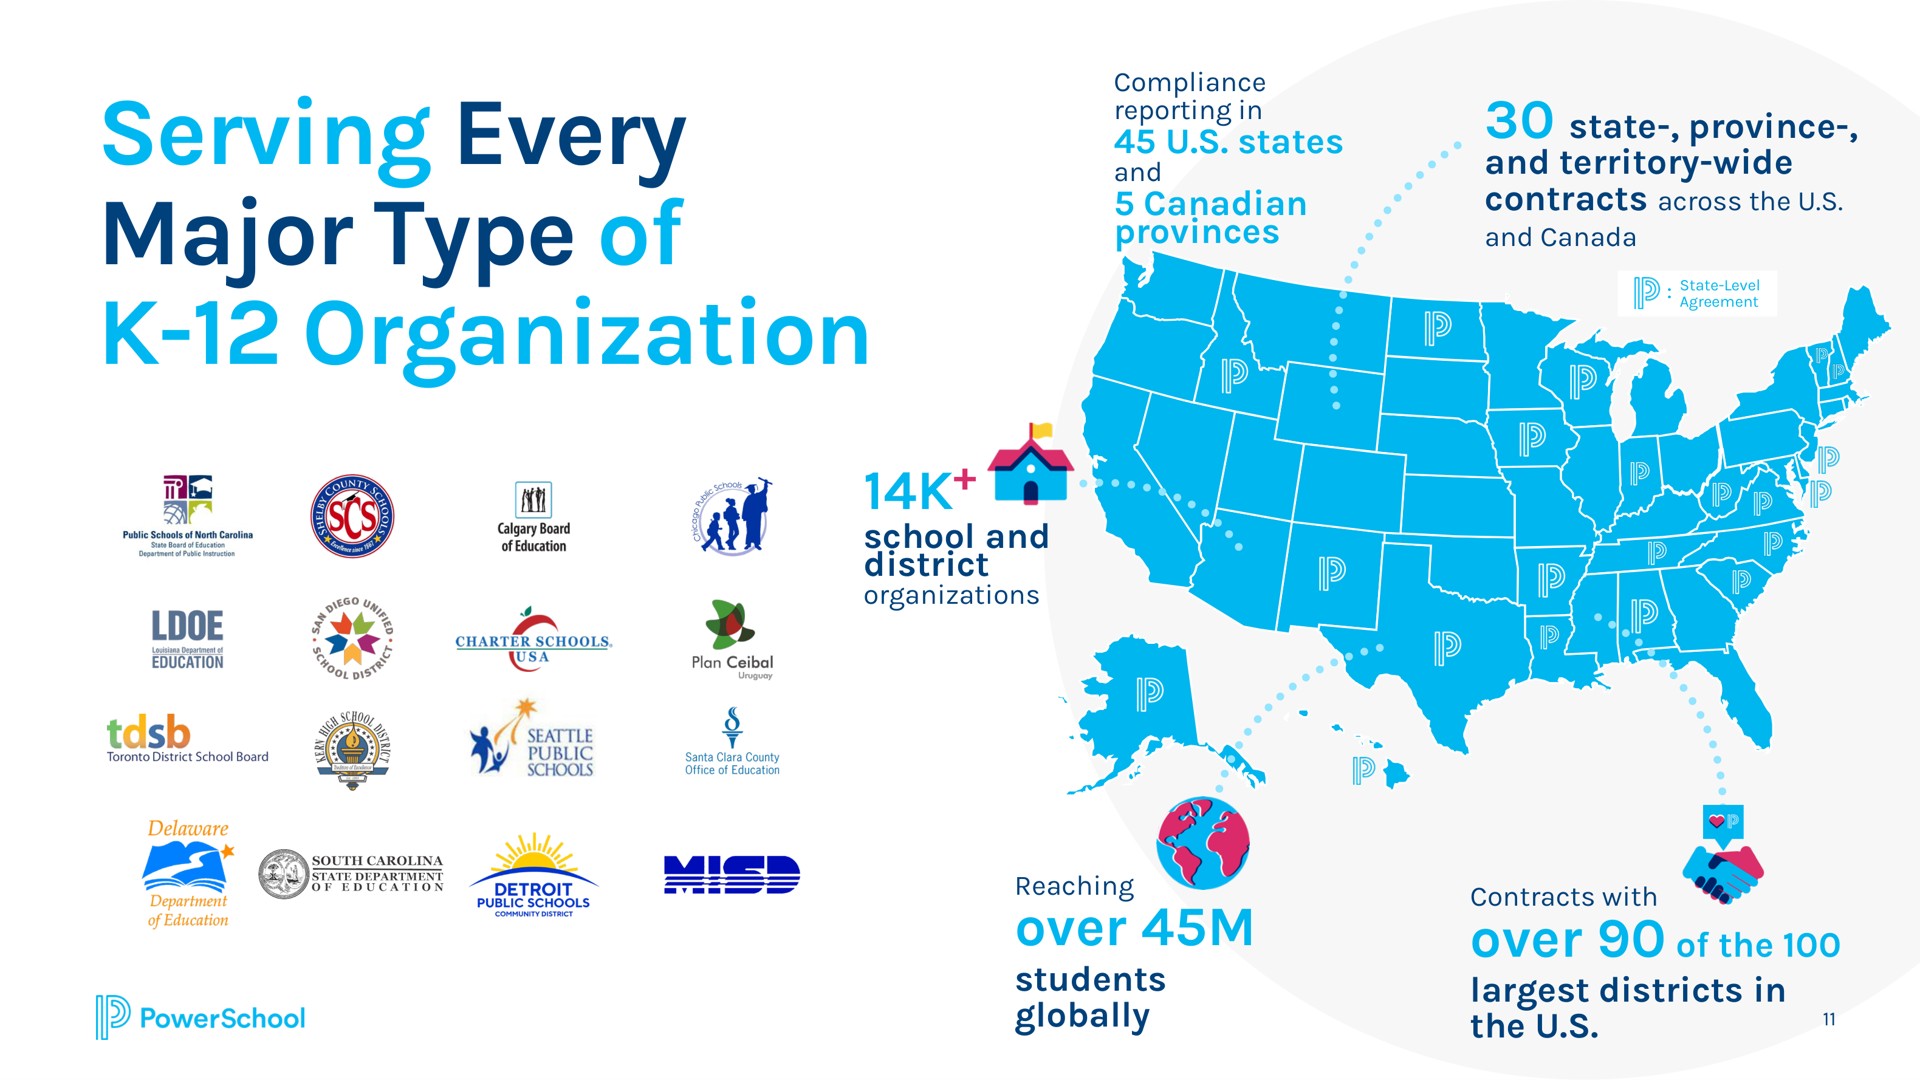 serving every major type of organization over state province tie | PowerSchool